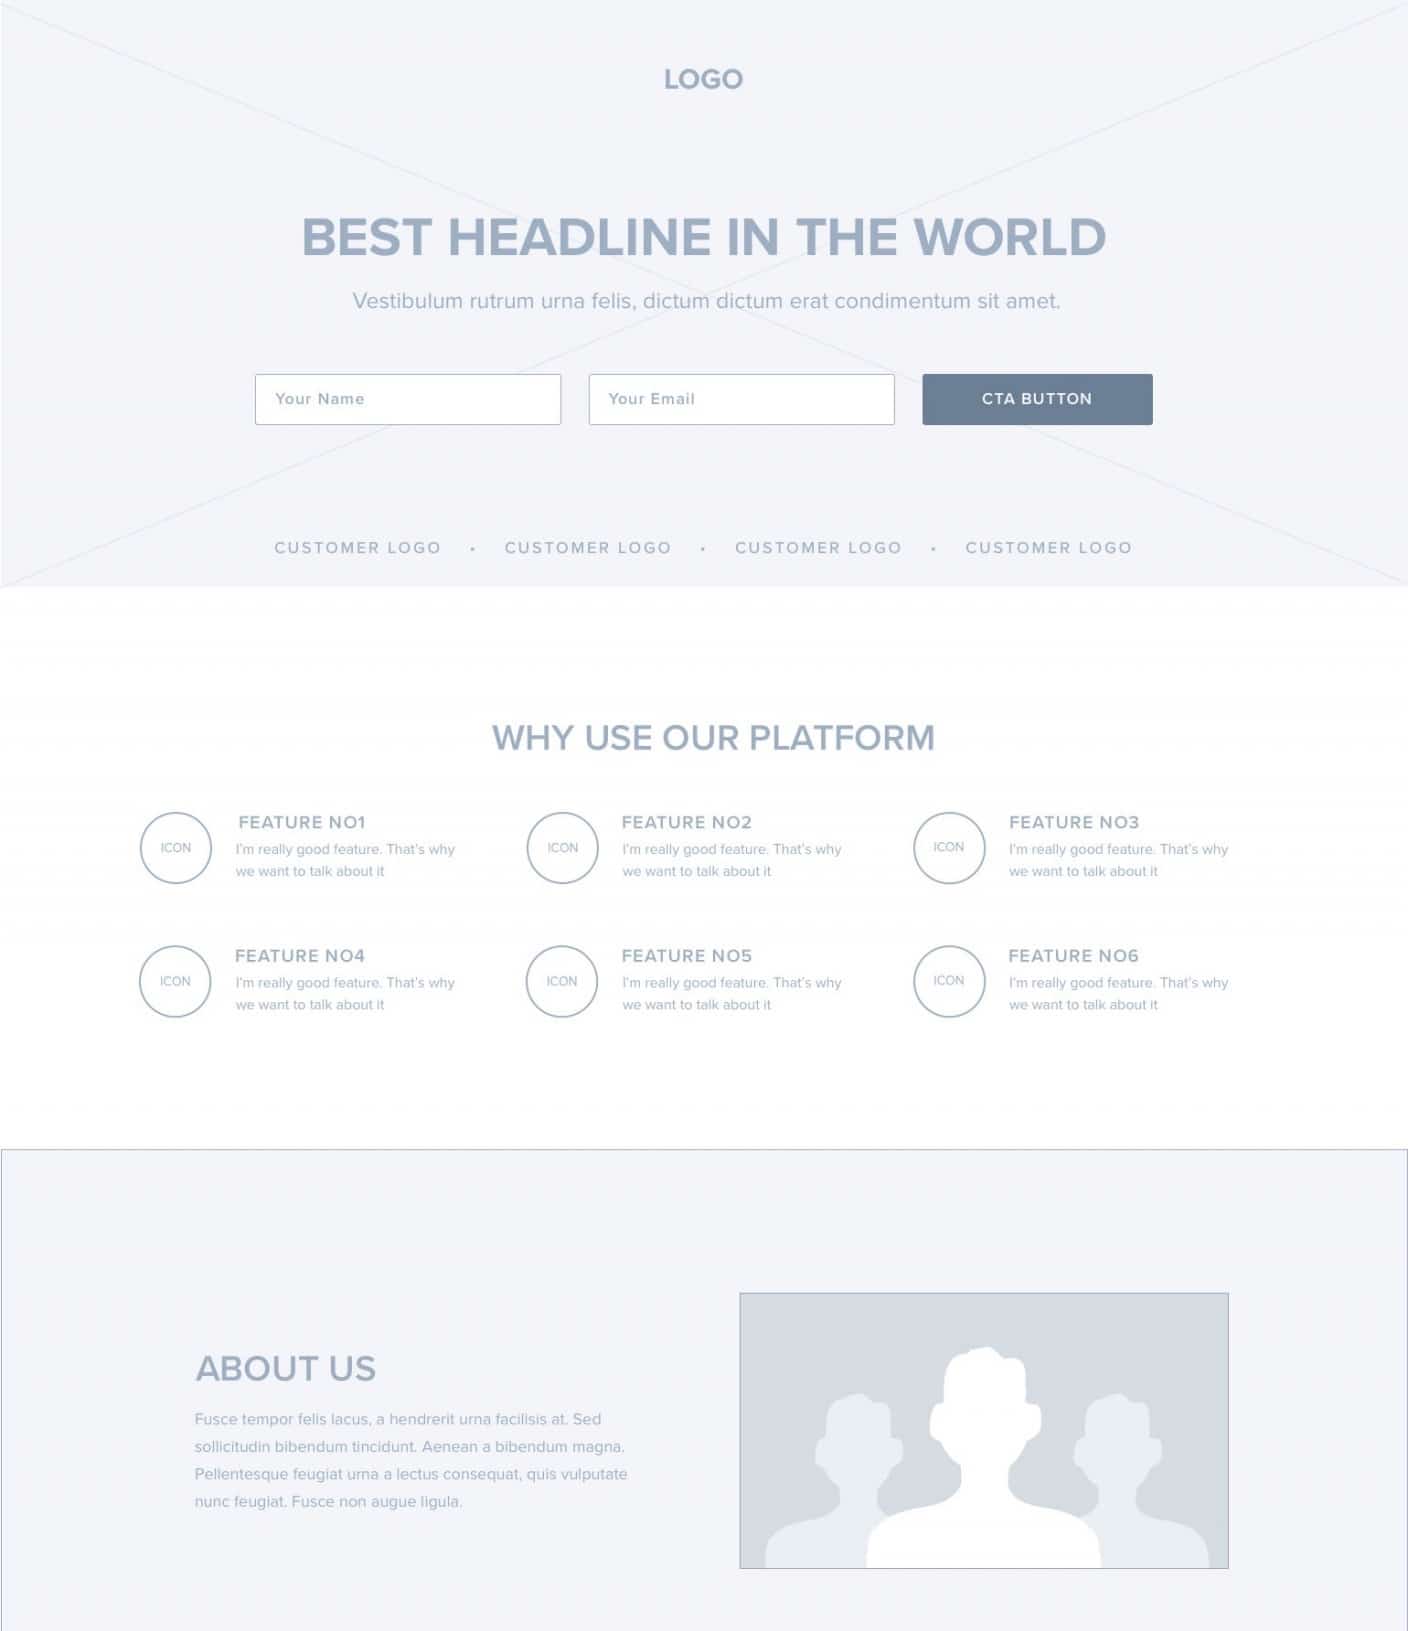 A longer landing page wireframe.